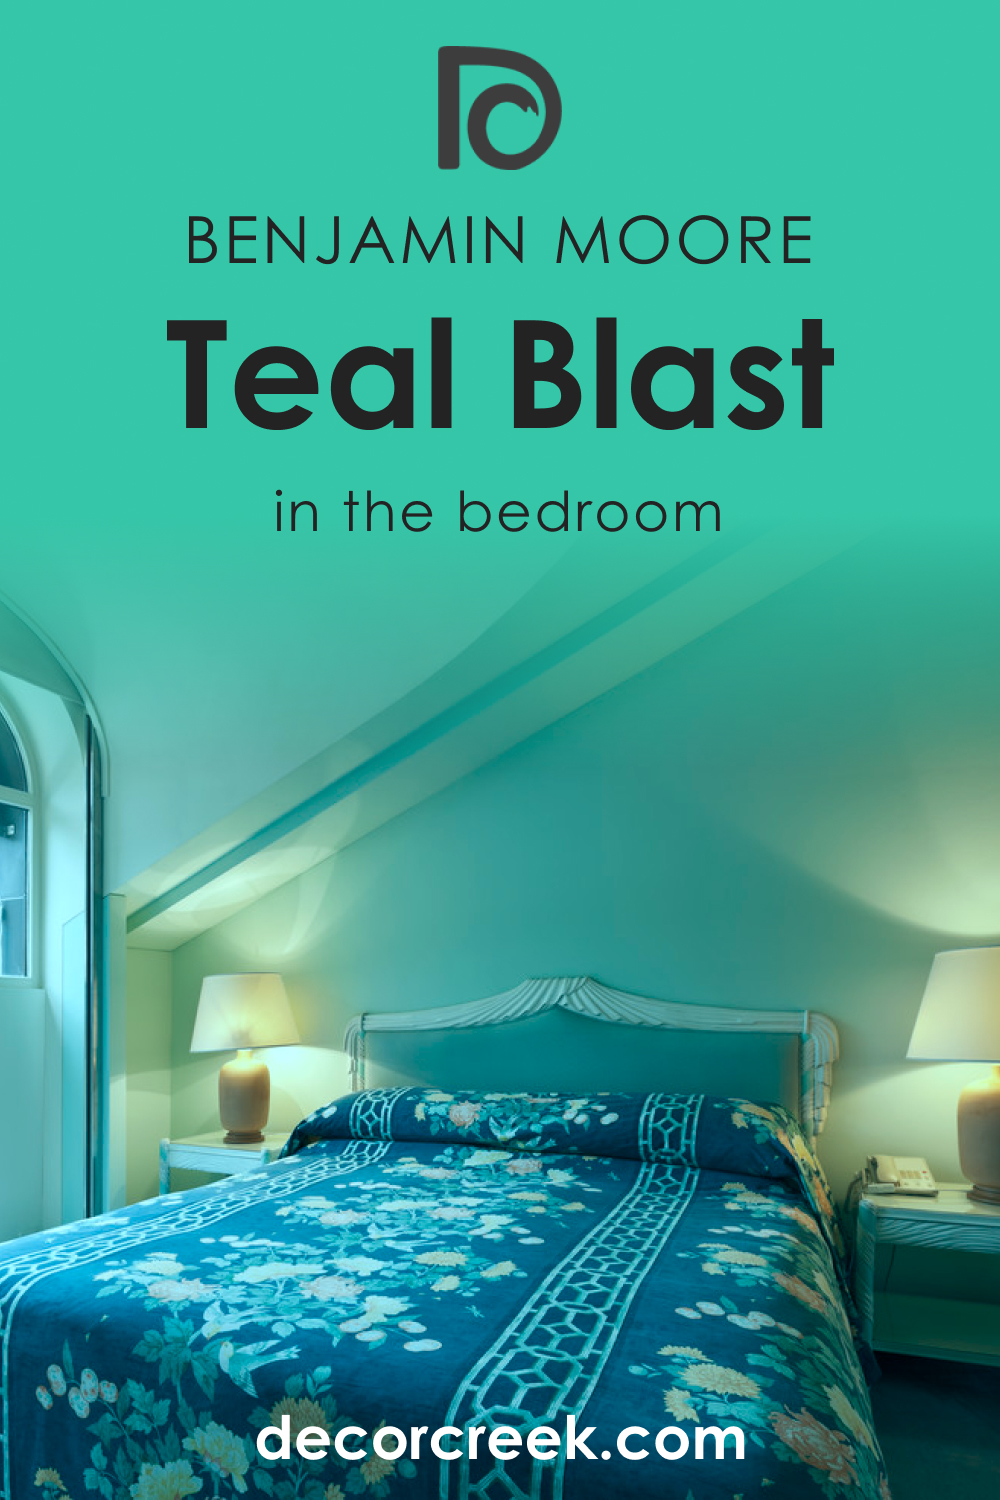 How to Use Teal Blast 2039-40 in the Bedroom?